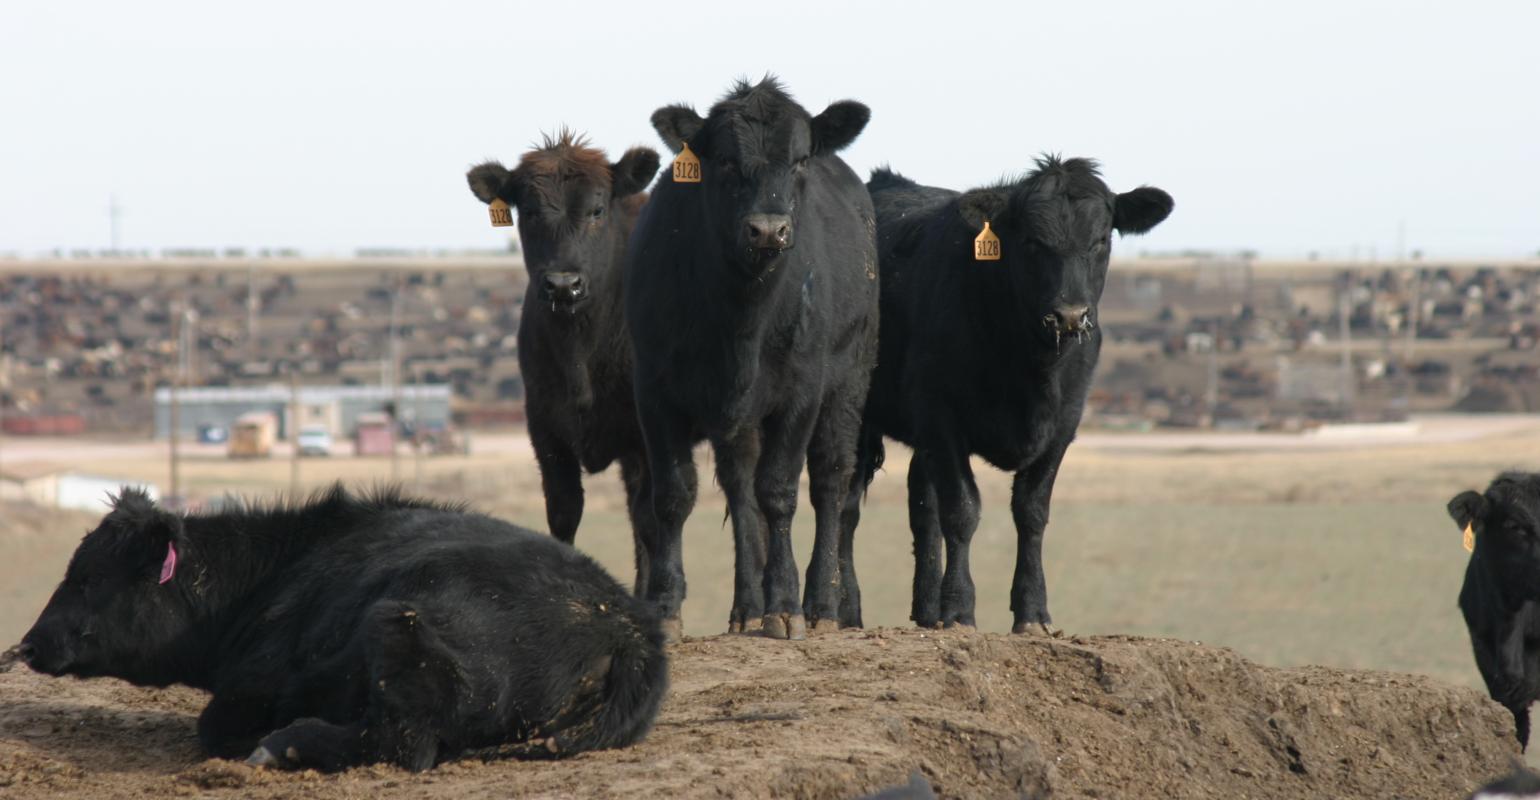 A.J. Tarpoff Provides Medical Explanation for Cattle Deaths in Kansas